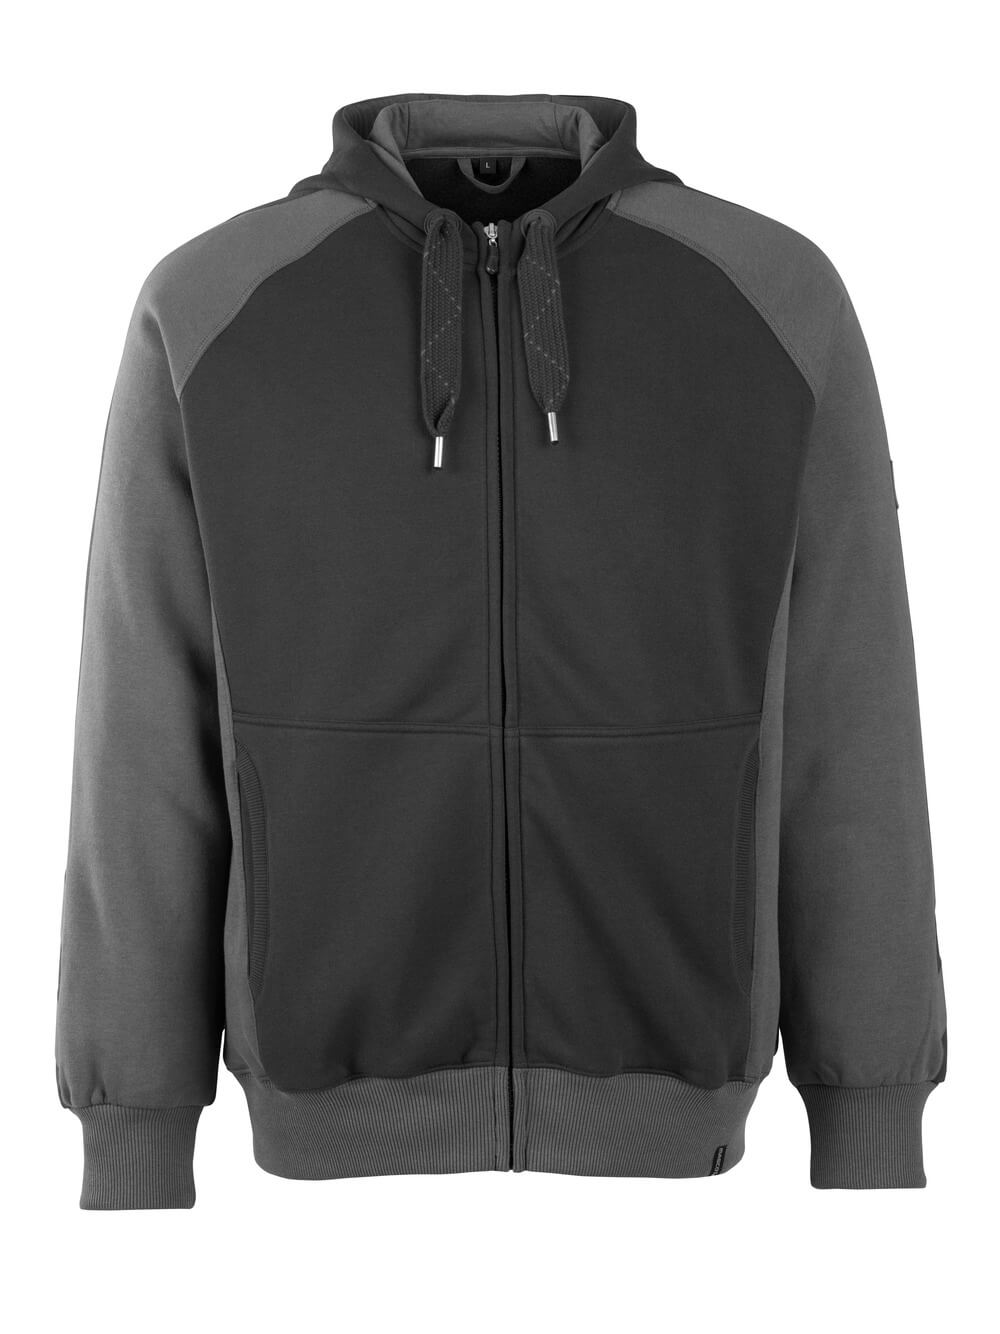 MASCOT®UNIQUE Hoodie with zipper Wiesbaden 50566 - DaltonSafety